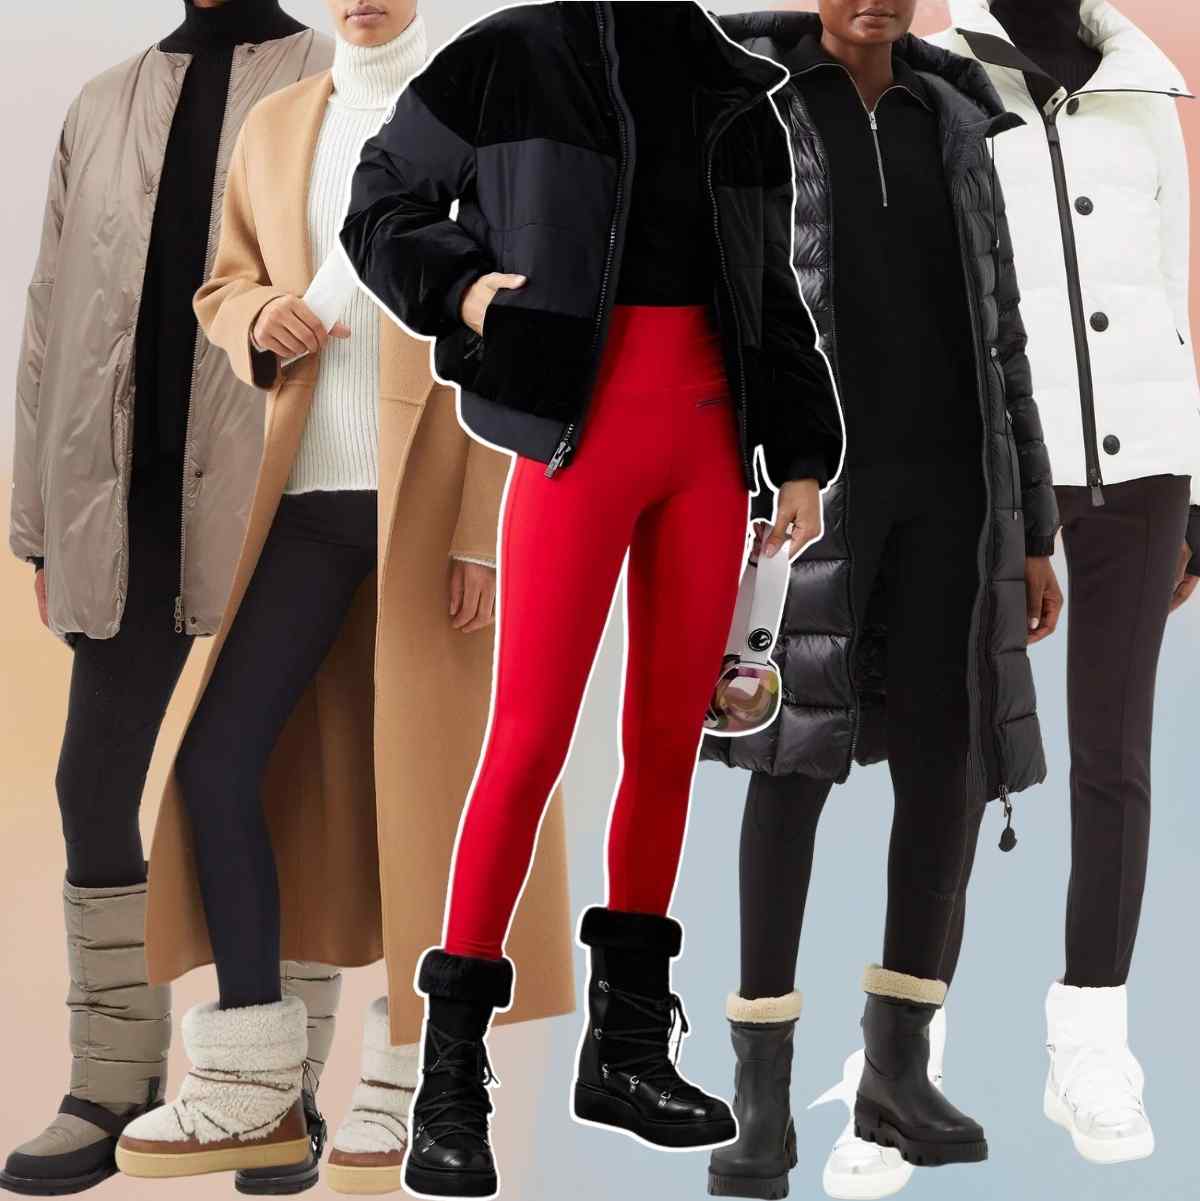 Styling Boots with Leggings - 9 Best Boots to Wear with Leggings